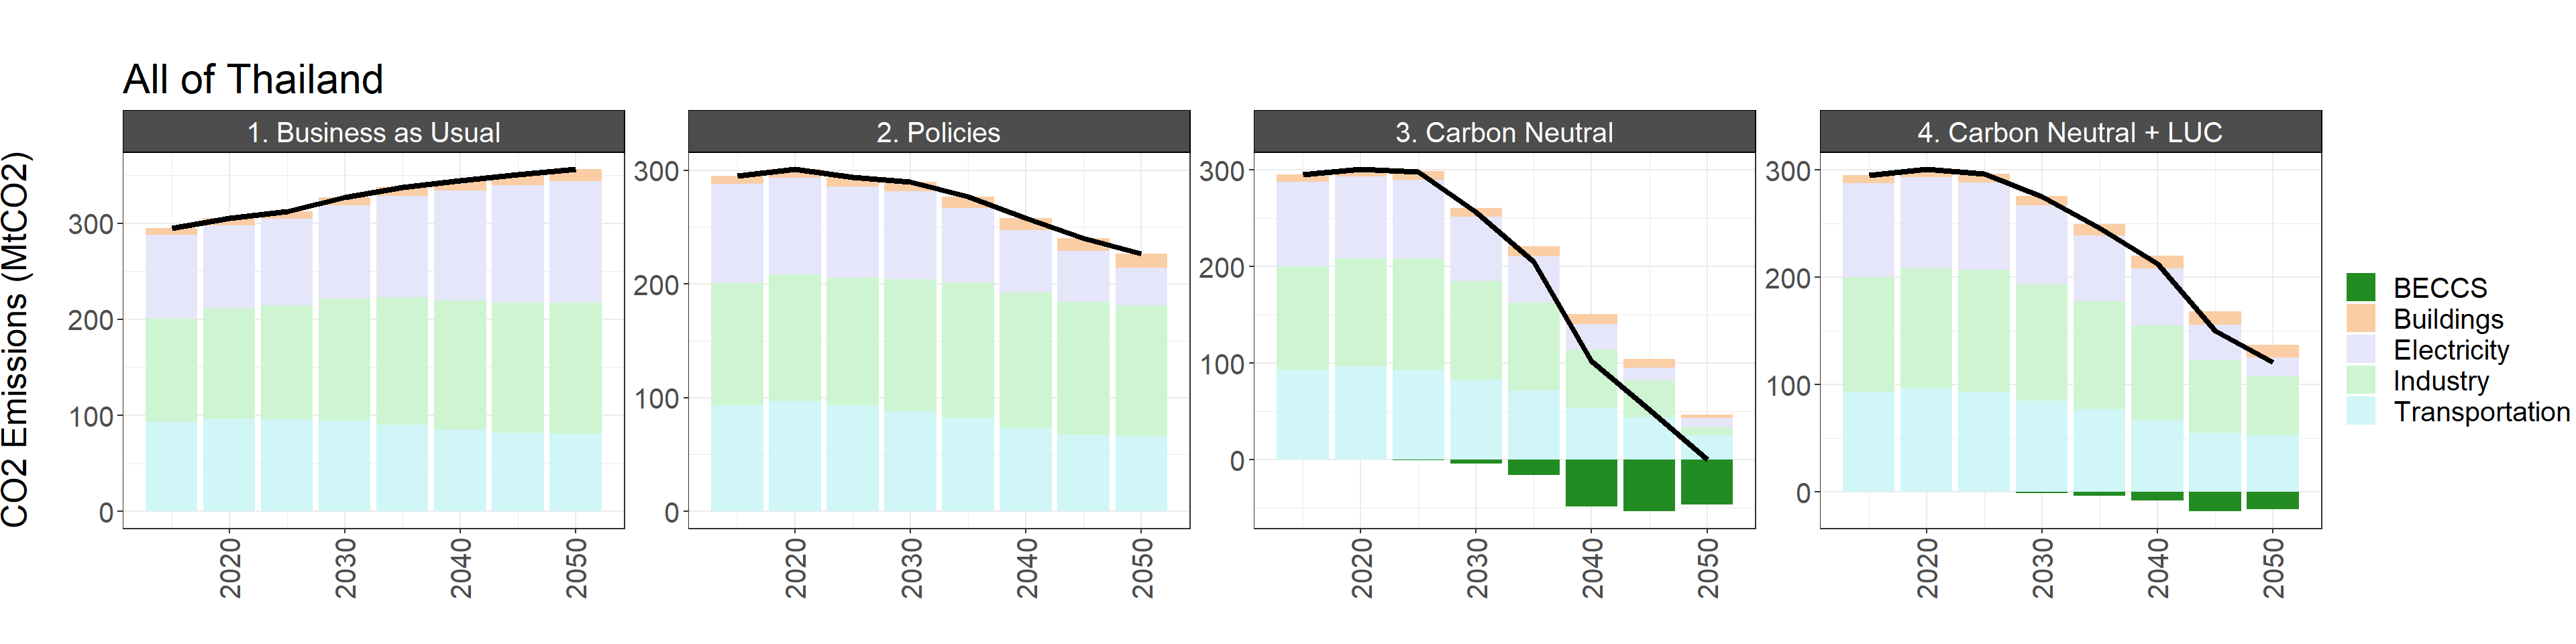 National CO2 emissions by sector, GHG emissions by gas, and GHG emissions by sector in the reference scenario and the low and high policies scenarios